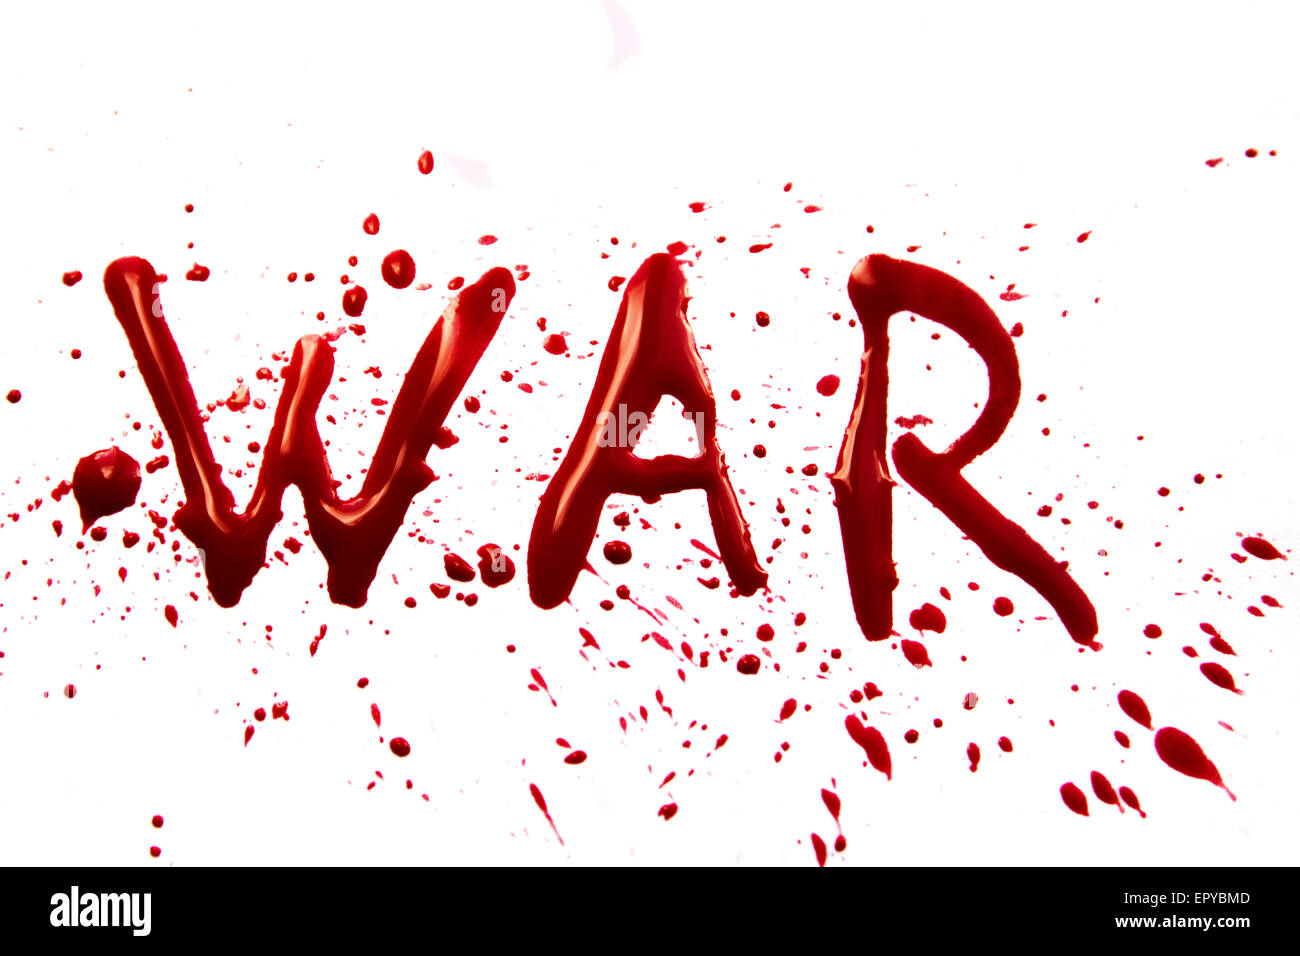 Bloody word War with splatters, droplets, stains isolated on white background Stock Photo